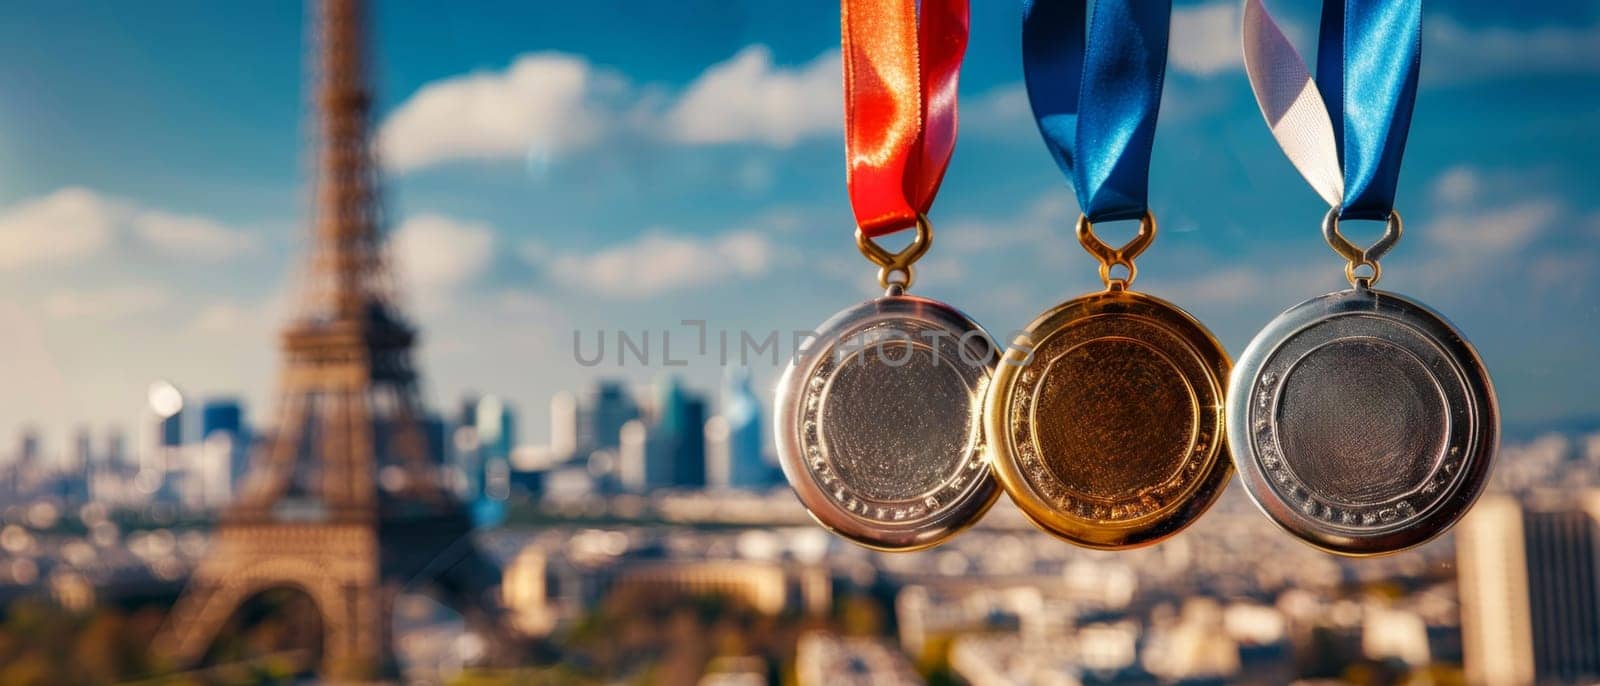 Silver, gold, and bronze medals with vivid ribbons hang before a sunlit Paris skyline, with the Eiffel Tower reaching into the blue sky, symbolizing triumph and Parisian pride. by sfinks